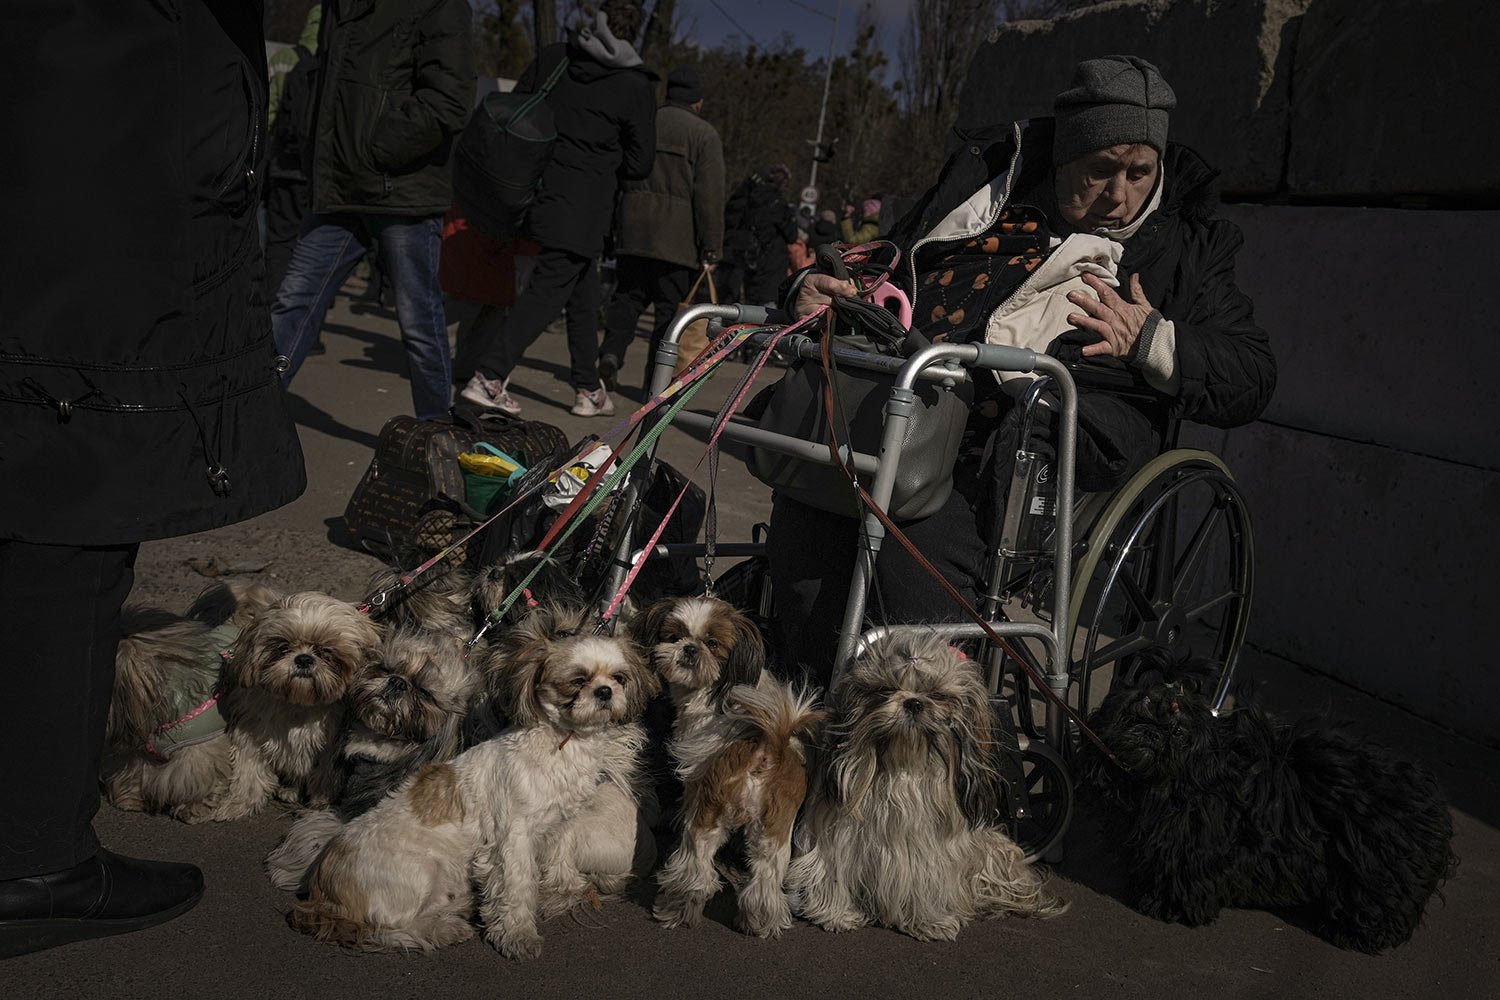  Antonina, 84, sits in a wheelchair after being evacuated with her 12 dogs from Irpin, at a triage point in Kyiv, Ukraine, Friday, March 11, 2022. (AP Photo/Vadim Ghirda) 